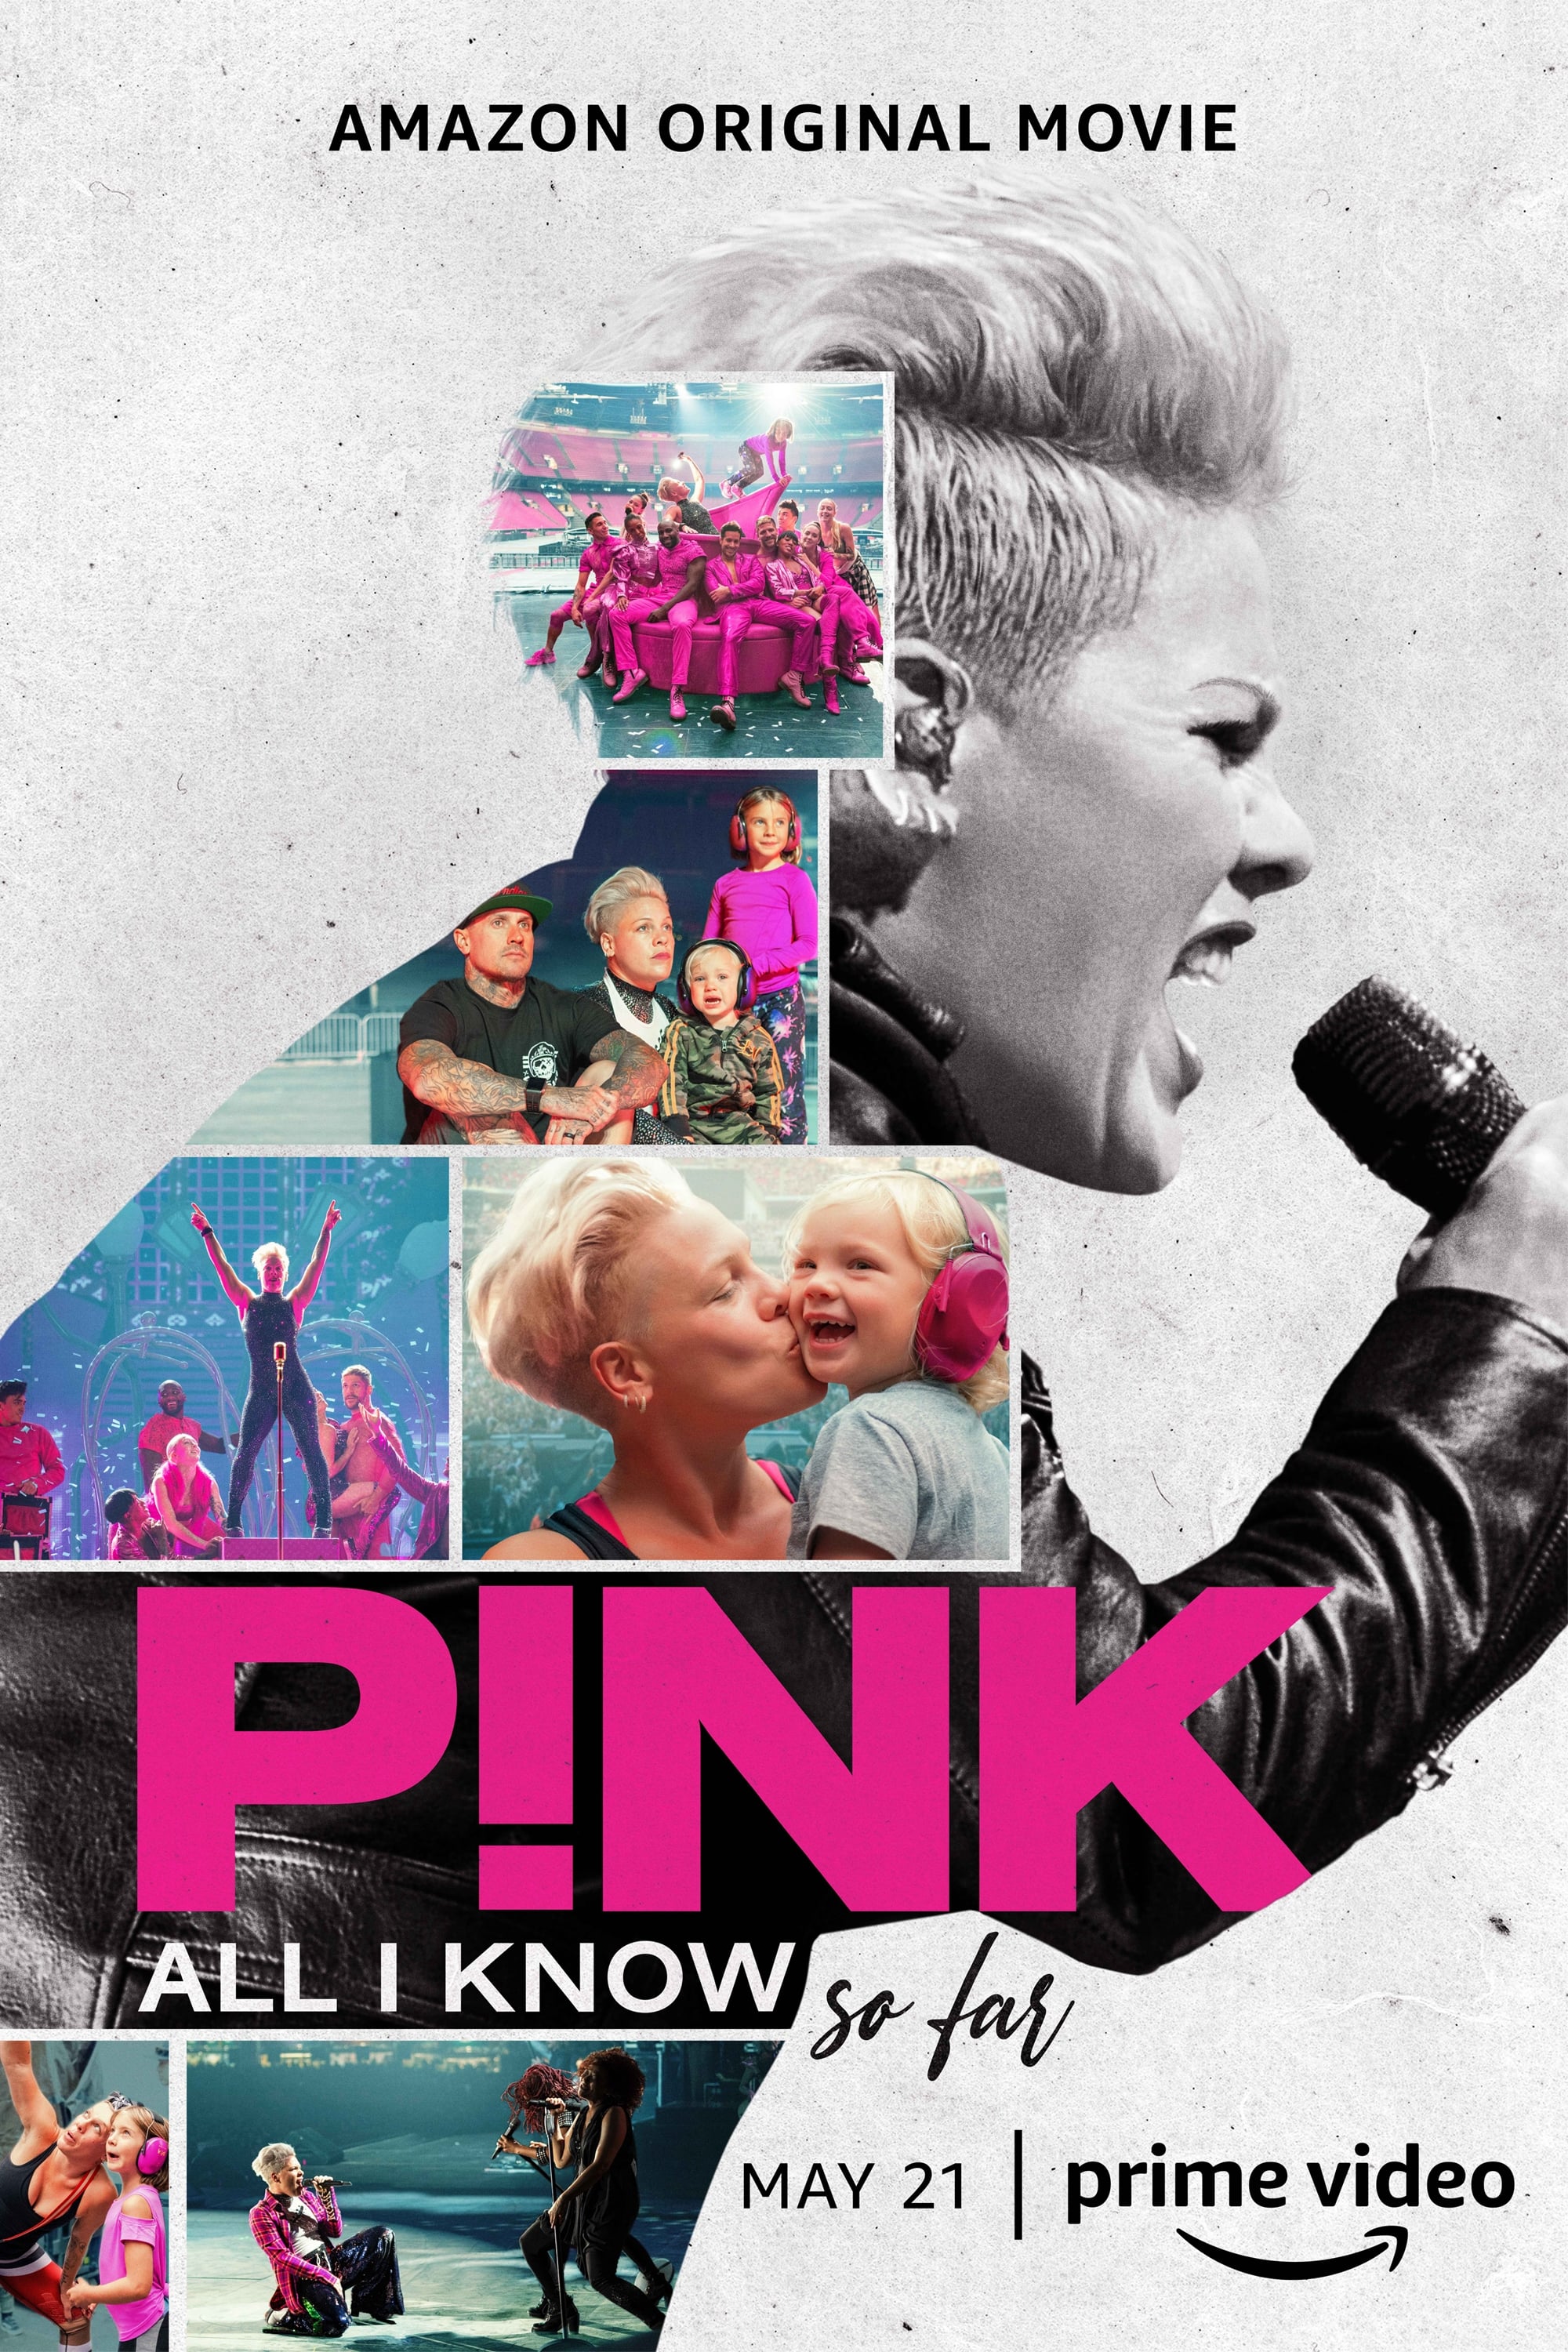 A behind-the-scenes look at P!NK as she balances family and life on the road, leading up to her first Wembley Stadium performance on 2019's 